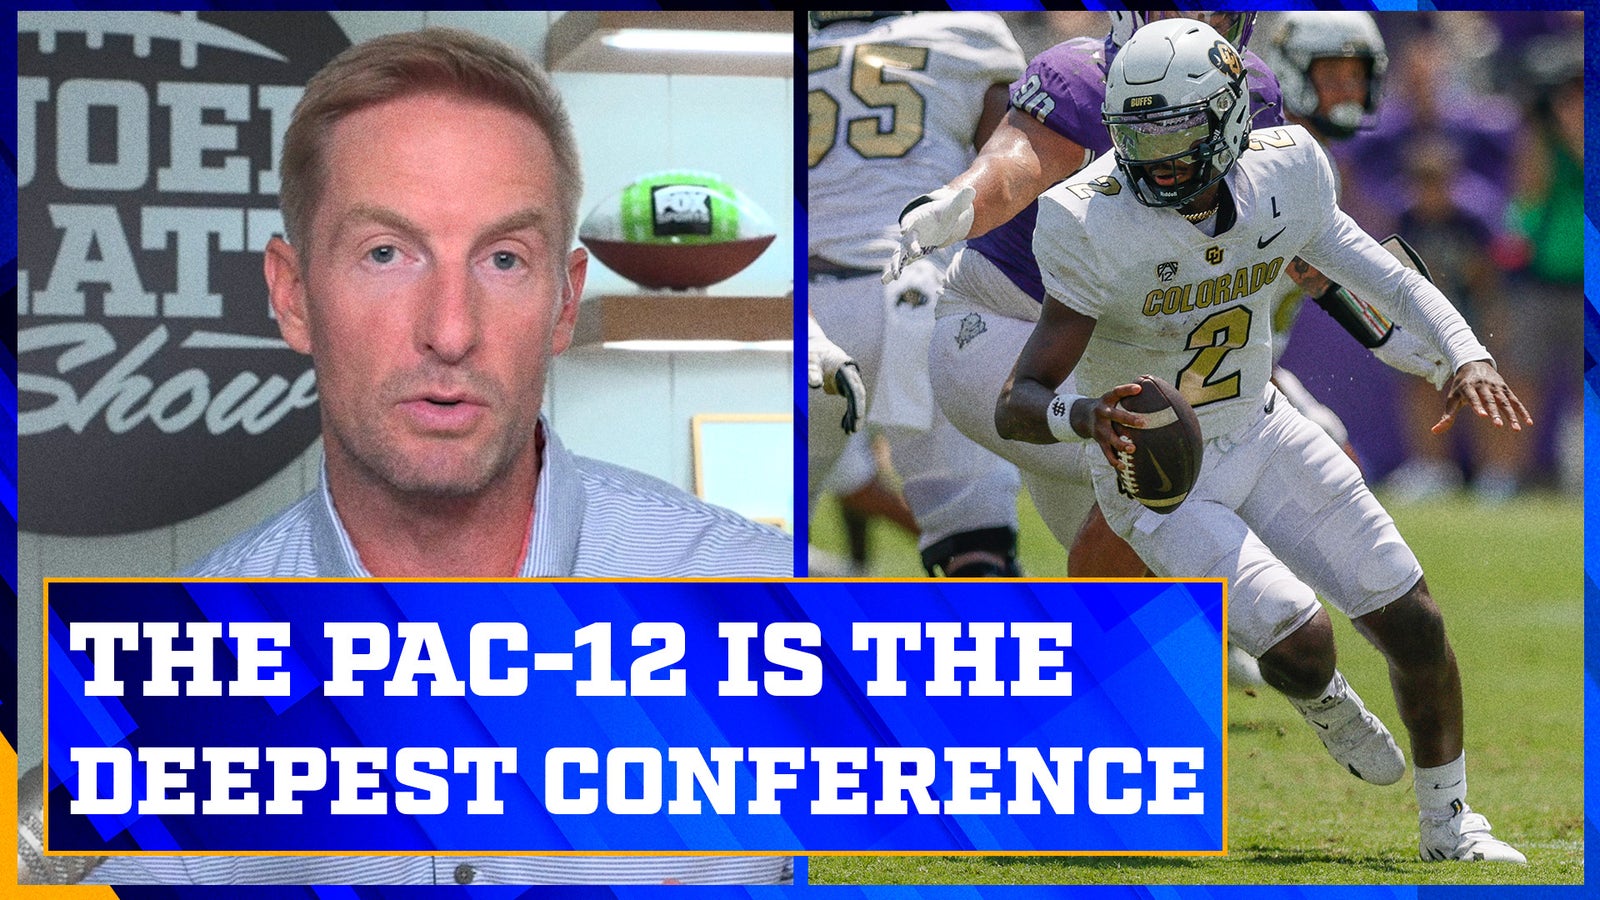 Is the Pac-12 the deepest conference in college football?